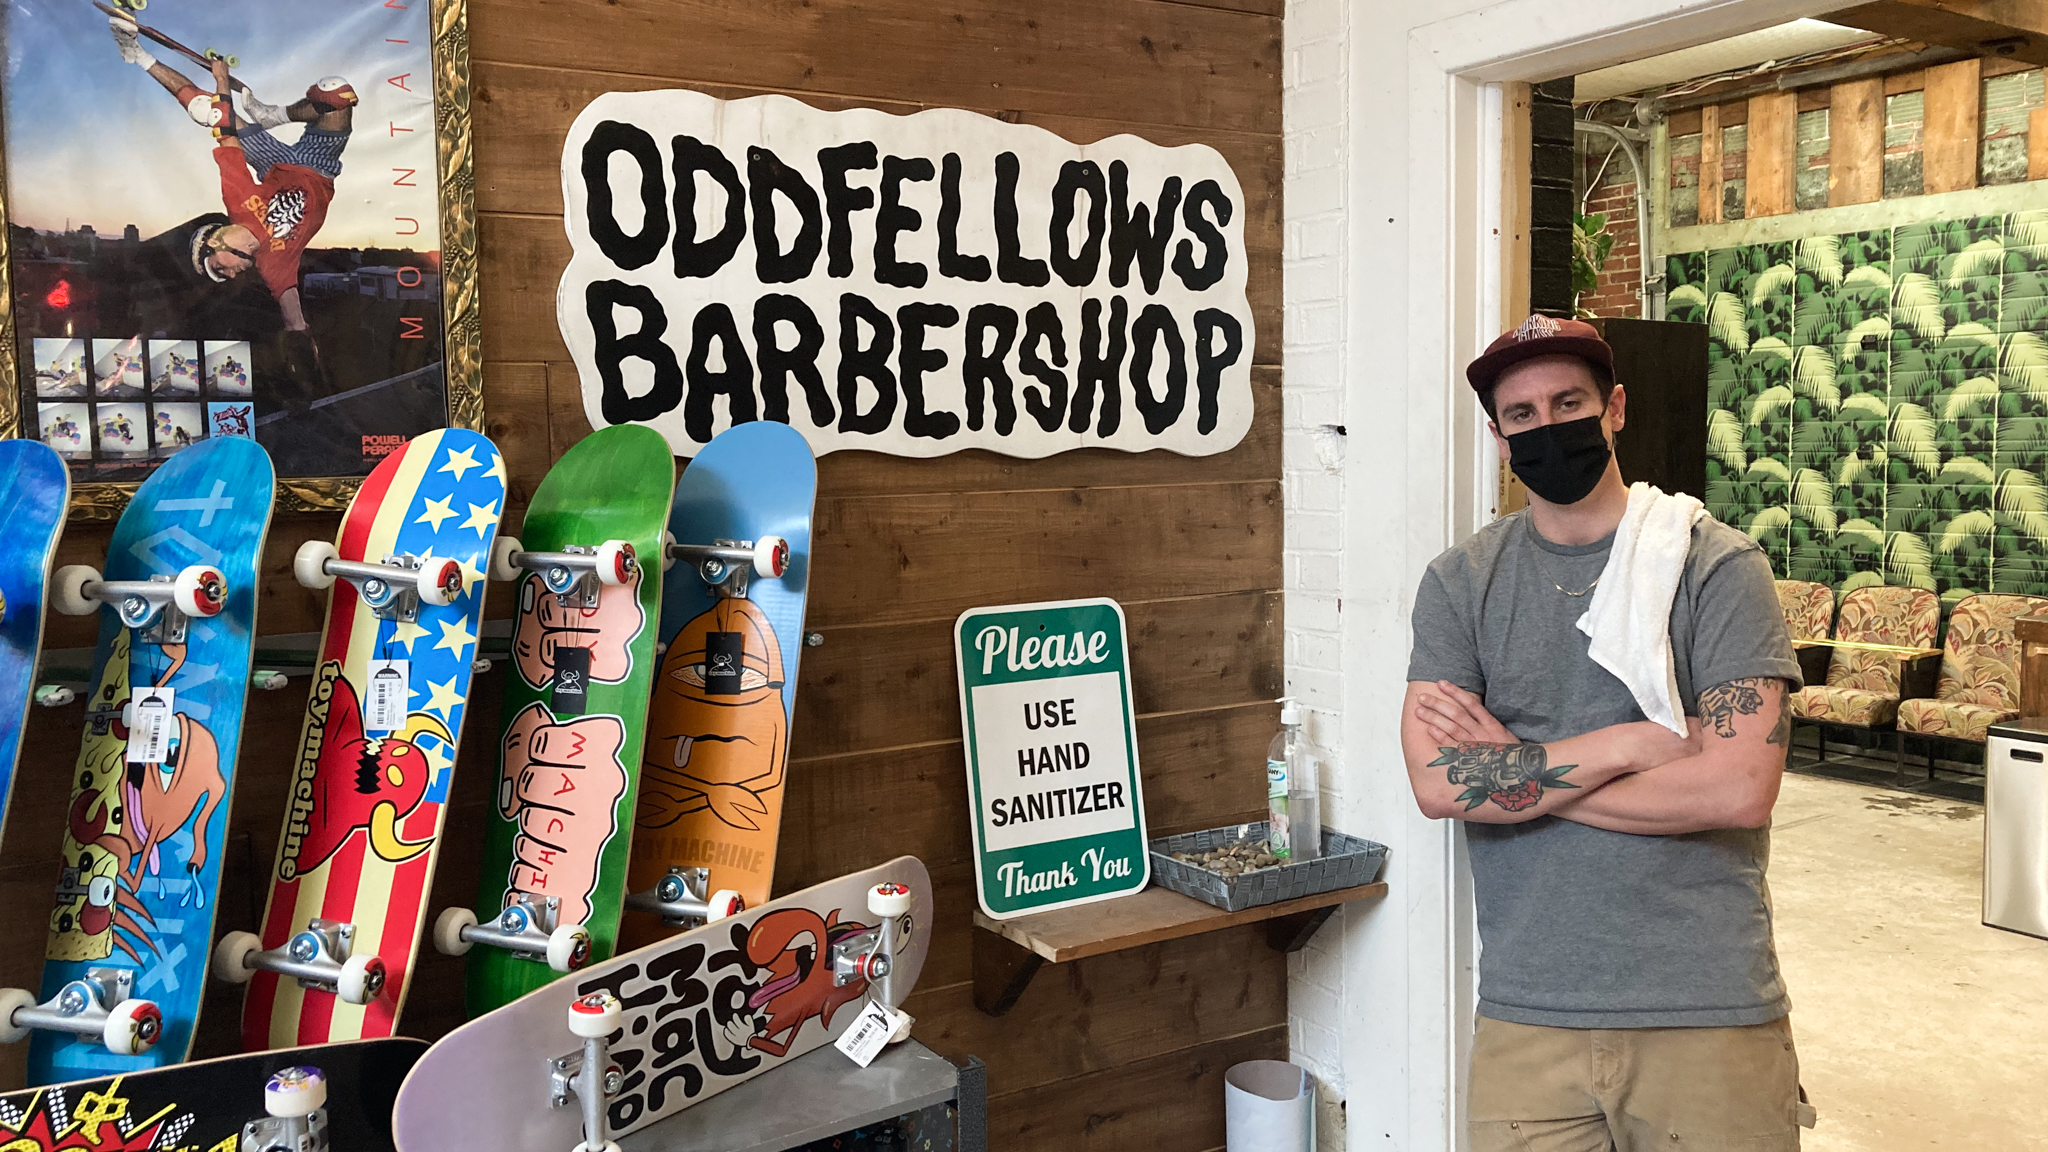 Joel Martell runs the Oddfellows Barbershop, a small business nestled in the back of the Pro Skates shop on Quinpool Road.